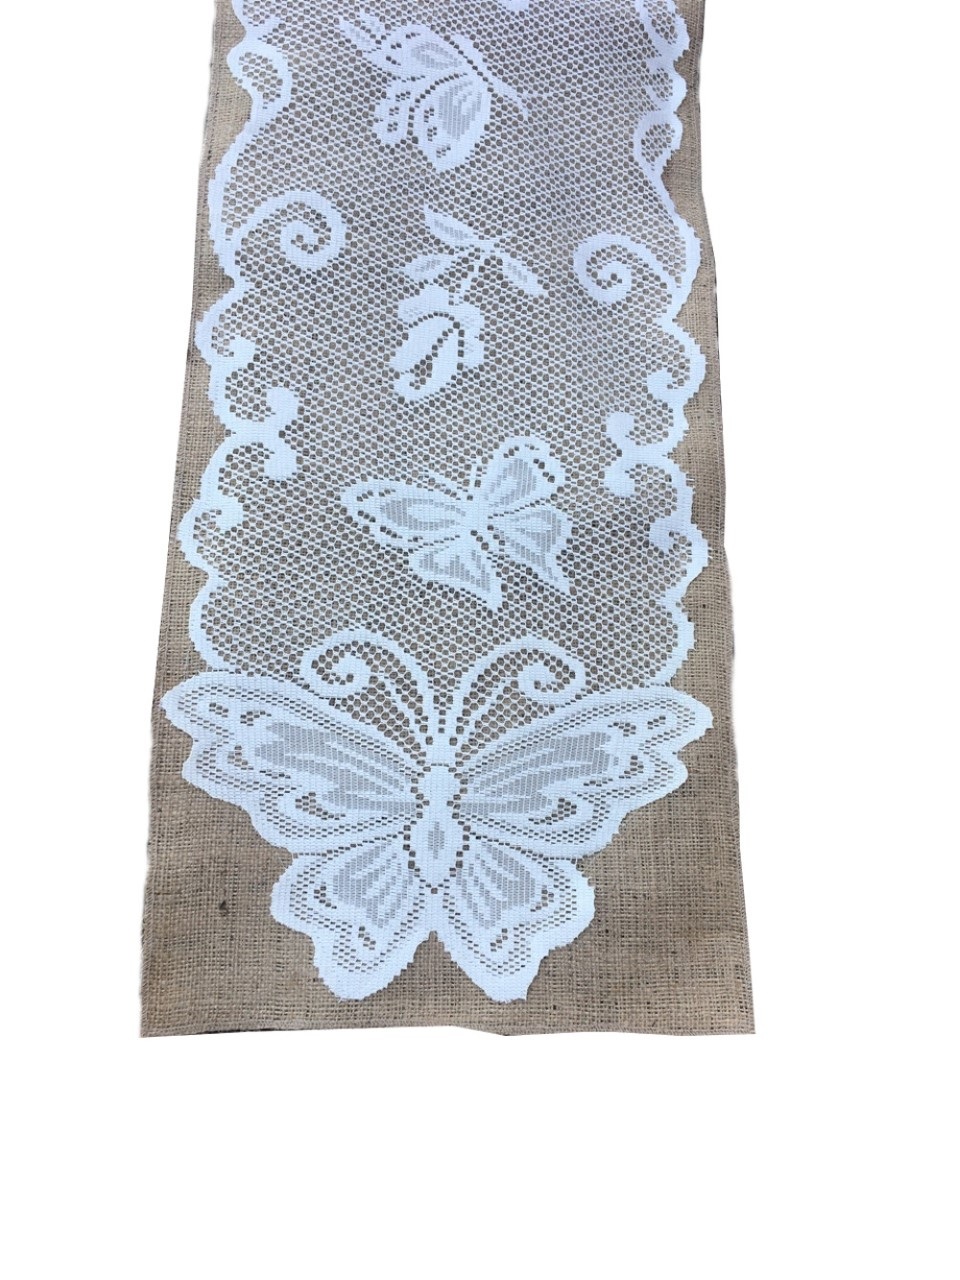 Burlap Table Runner With Lace - Butterfly Design 14" x 96"